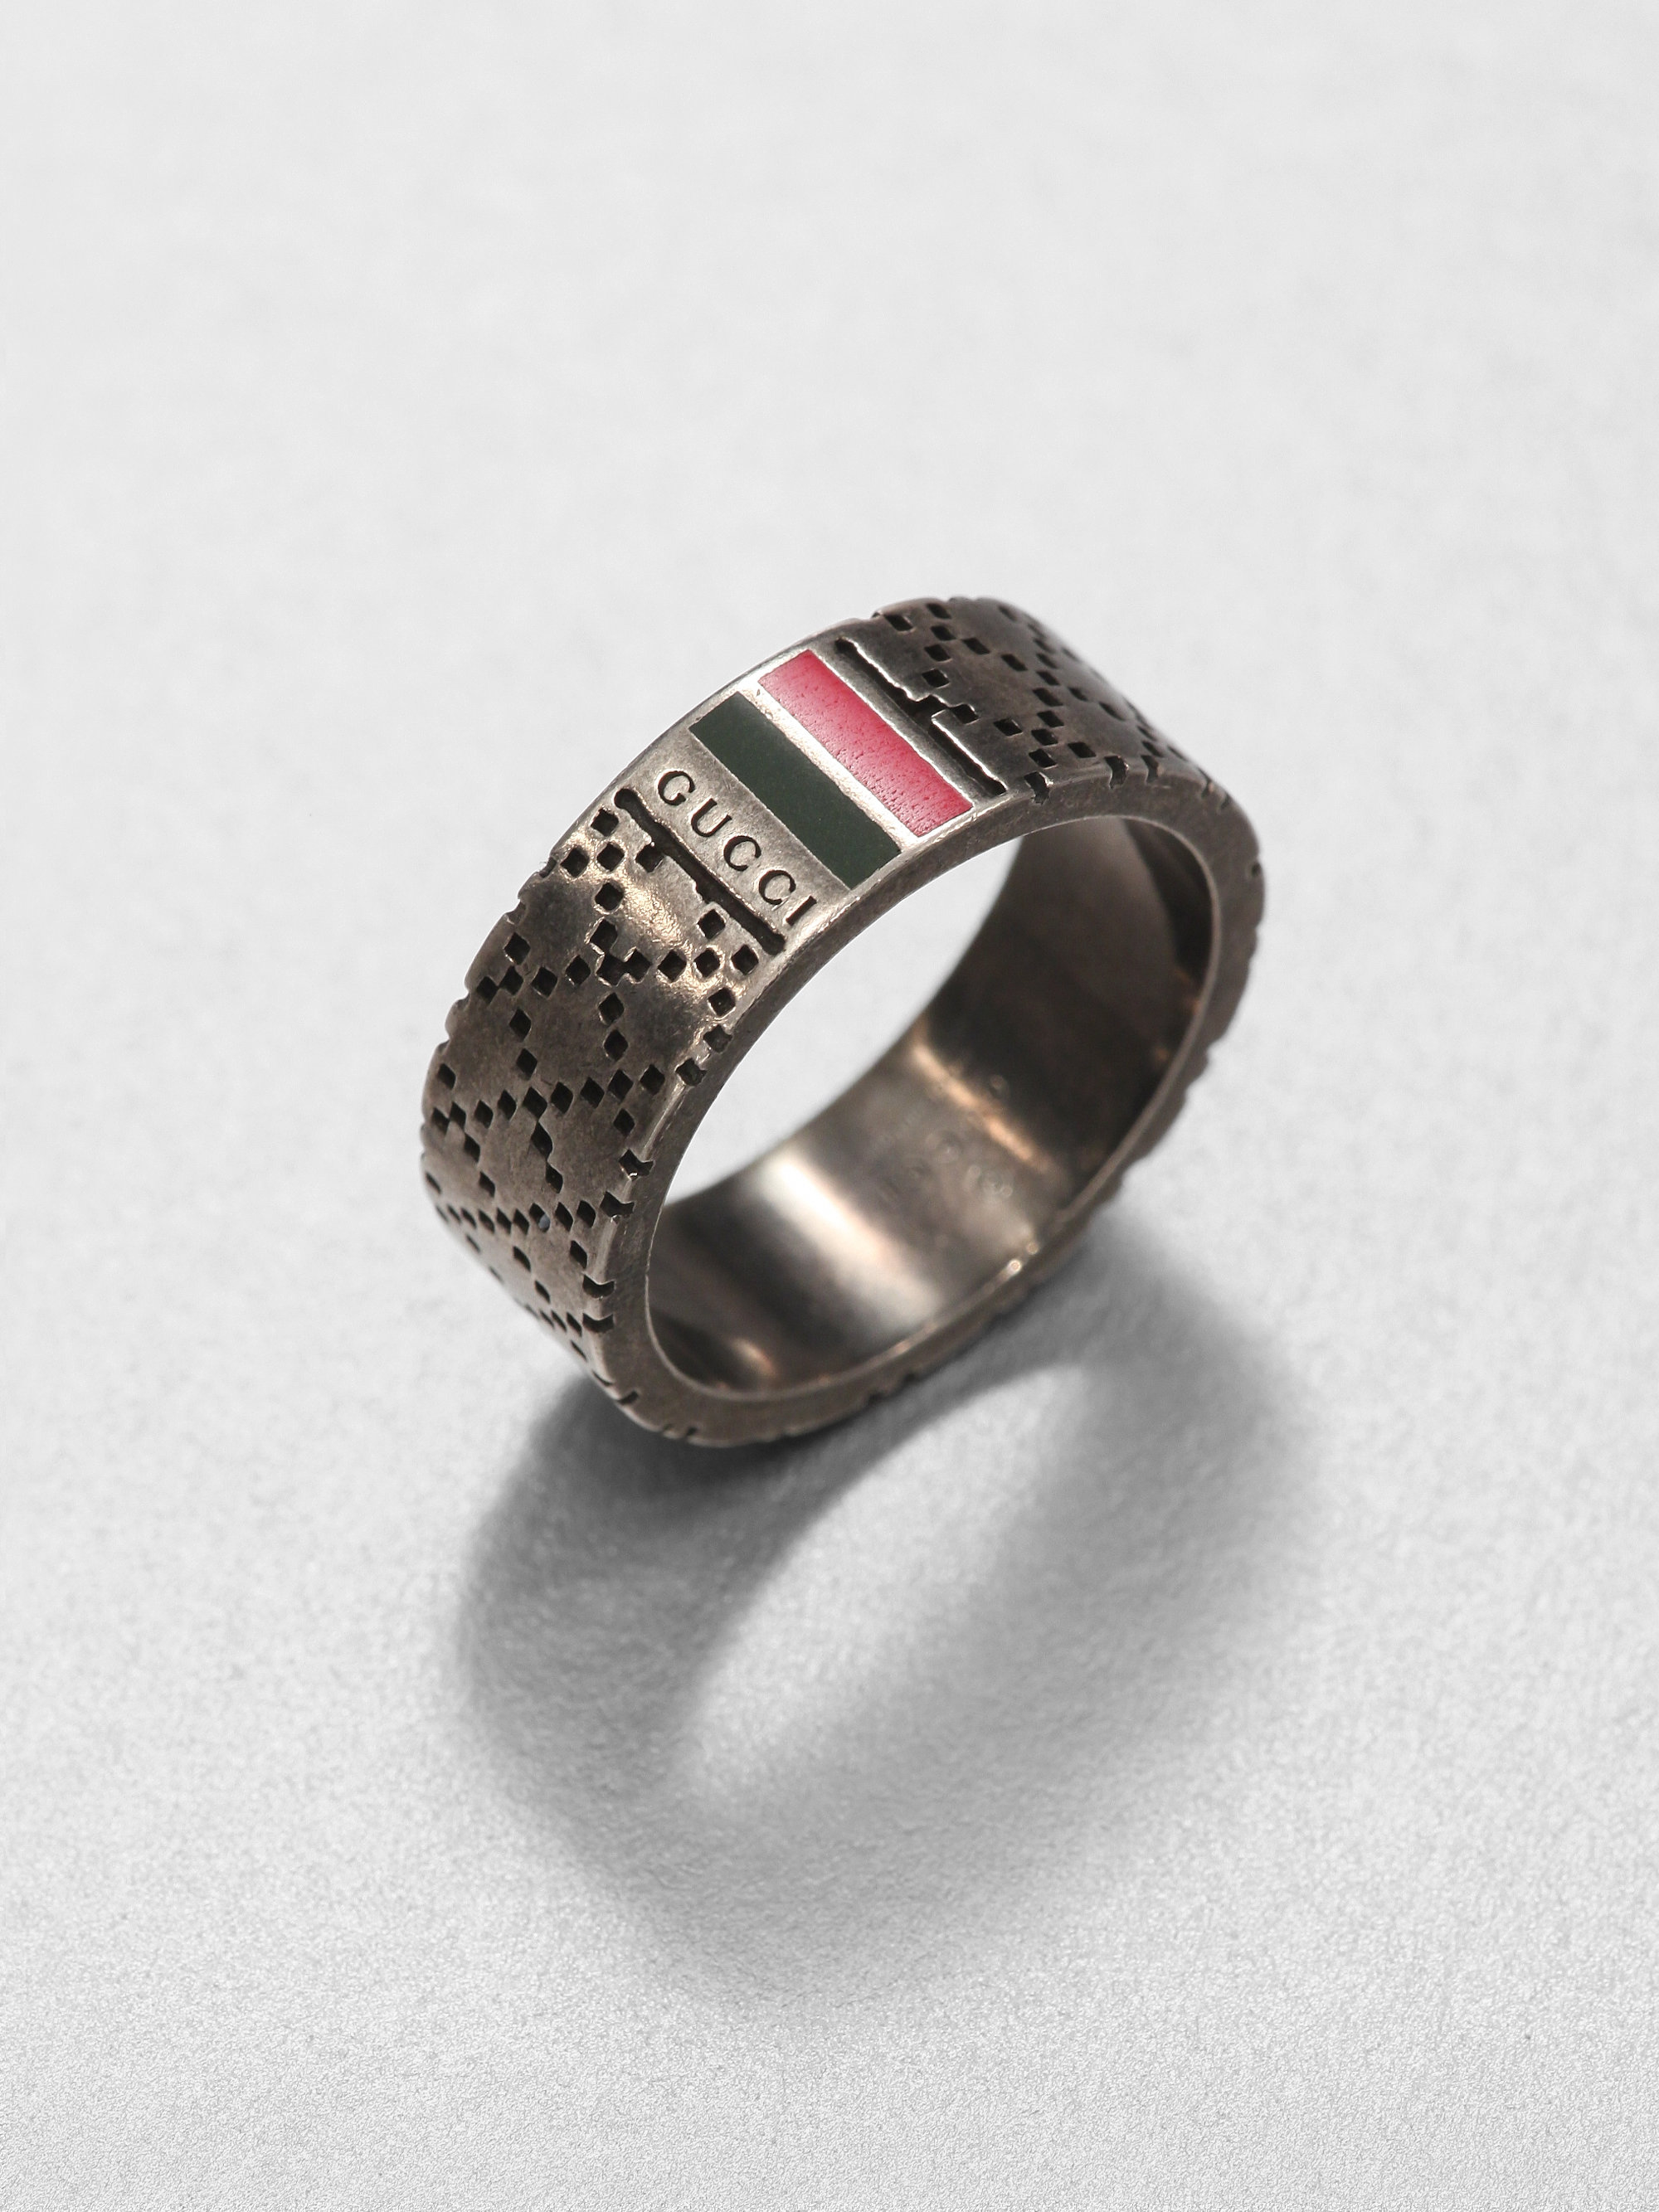 Lyst - Gucci Sterling Silver Ring in Metallic for Men